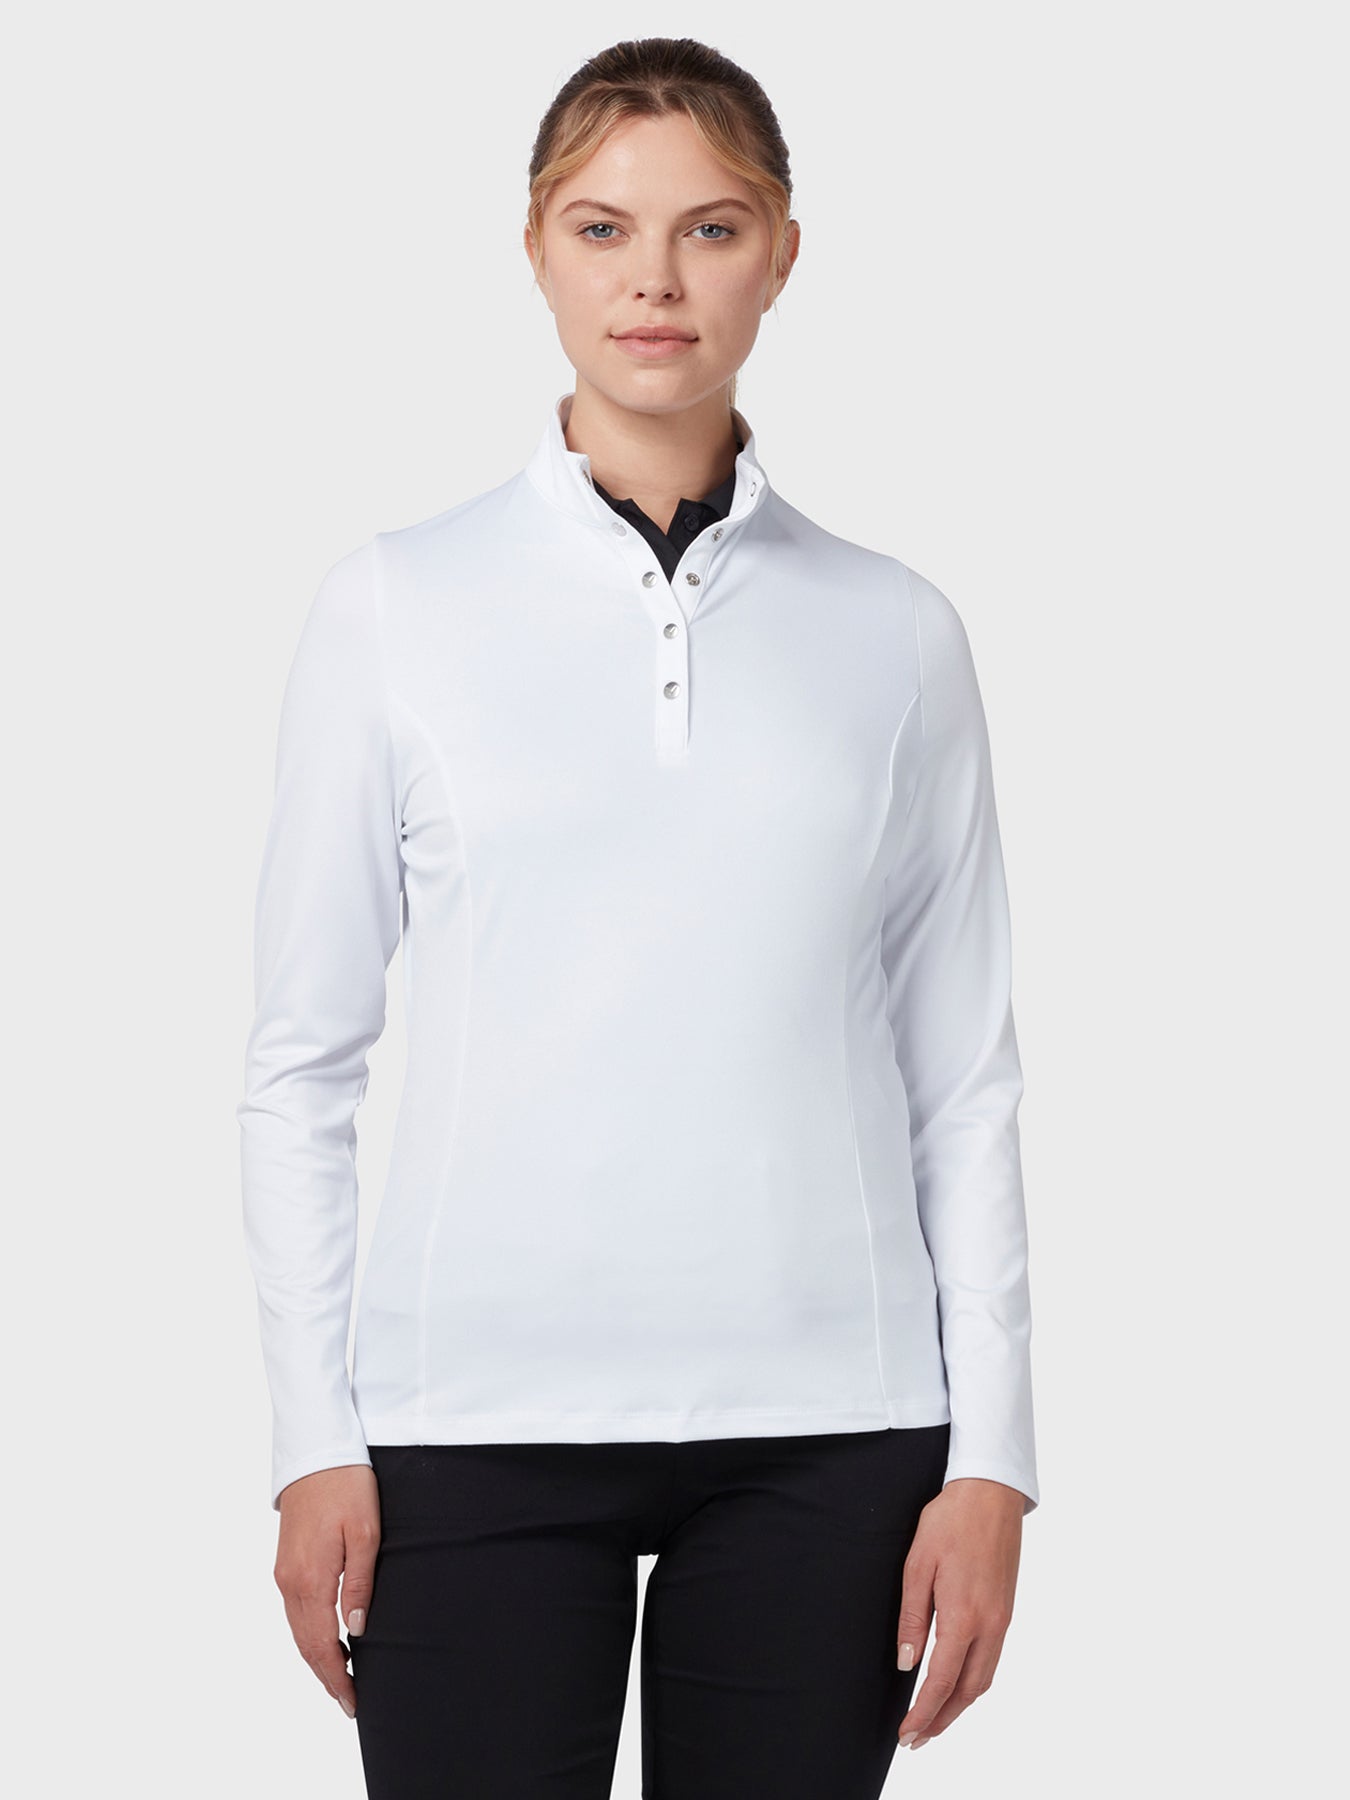 View Womens Thermal Longsleeve Fleece Back Jersey Polo In Brilliant White information